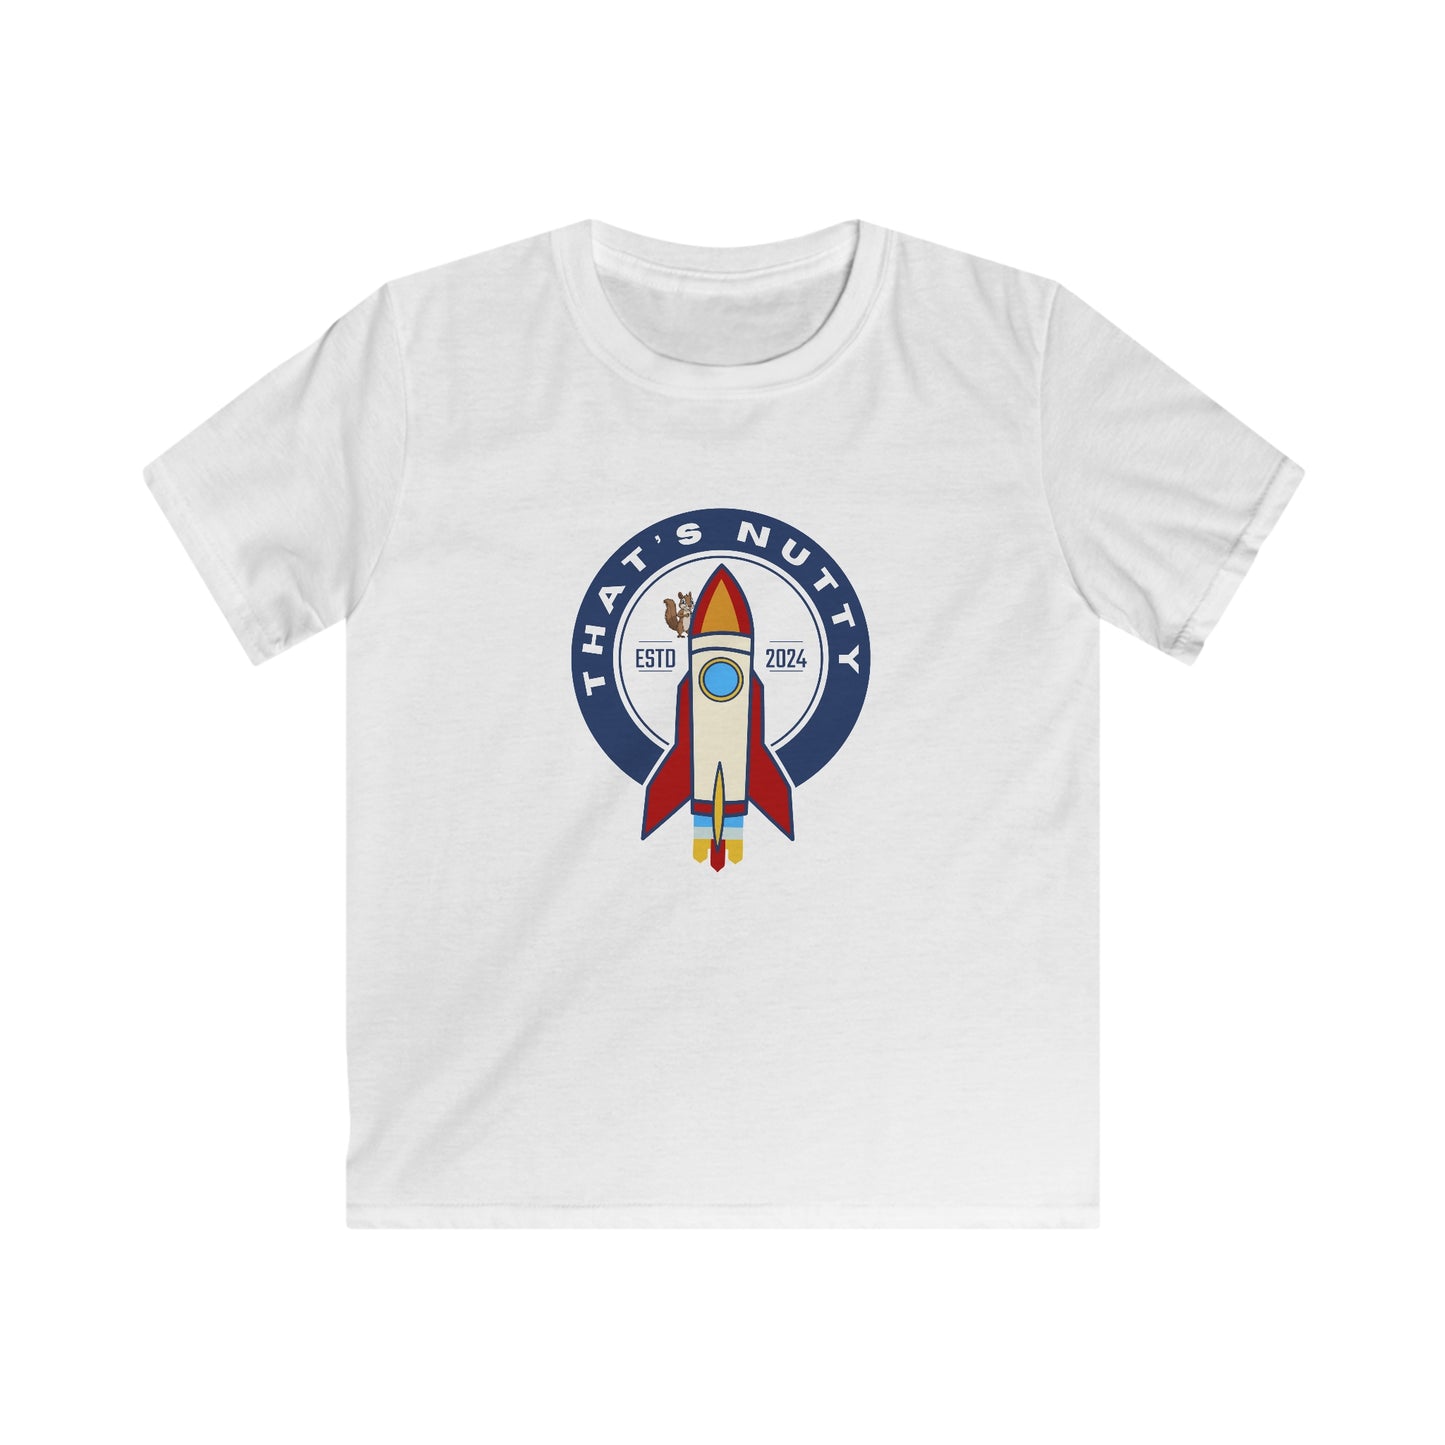 That's Nutty On A Rocket Ship. Kids Softstyle Tee